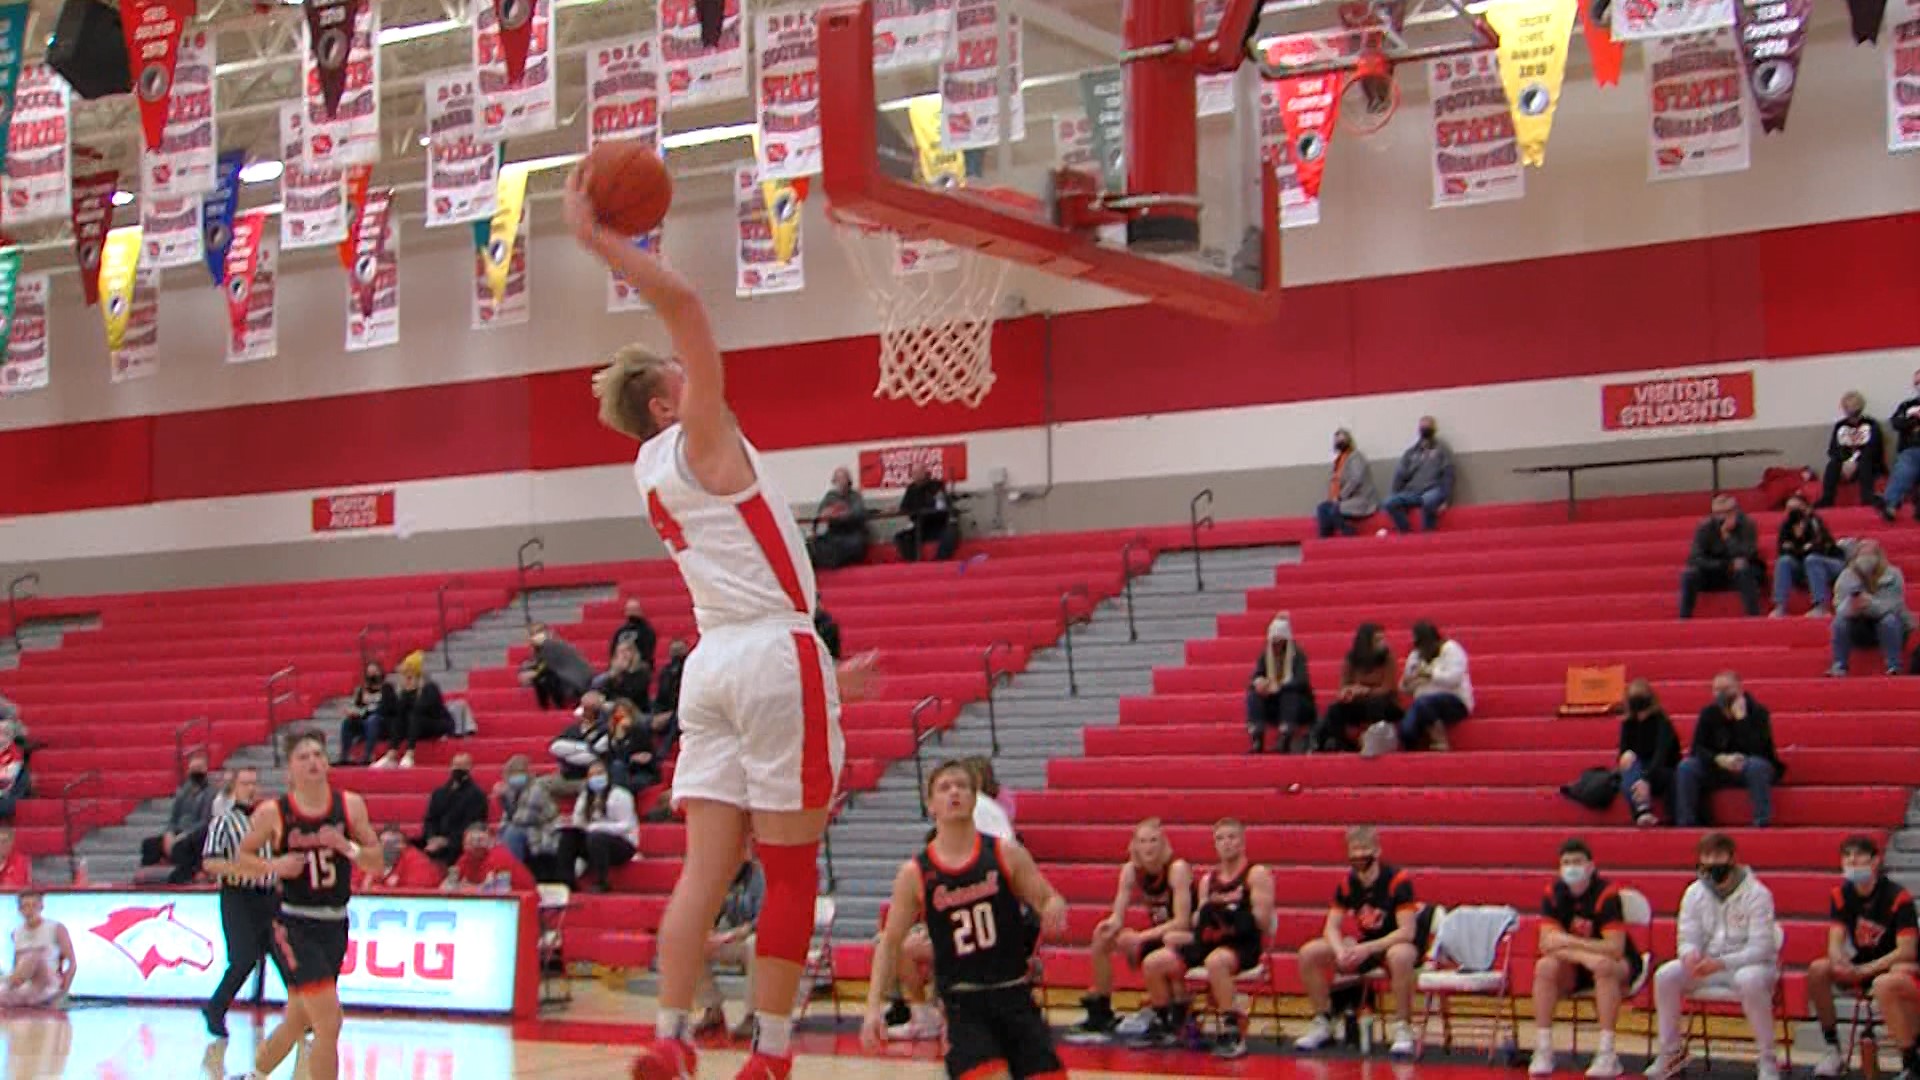 DC-G girls took care of Grinnell by 11, and the boys followed with a 21-point win